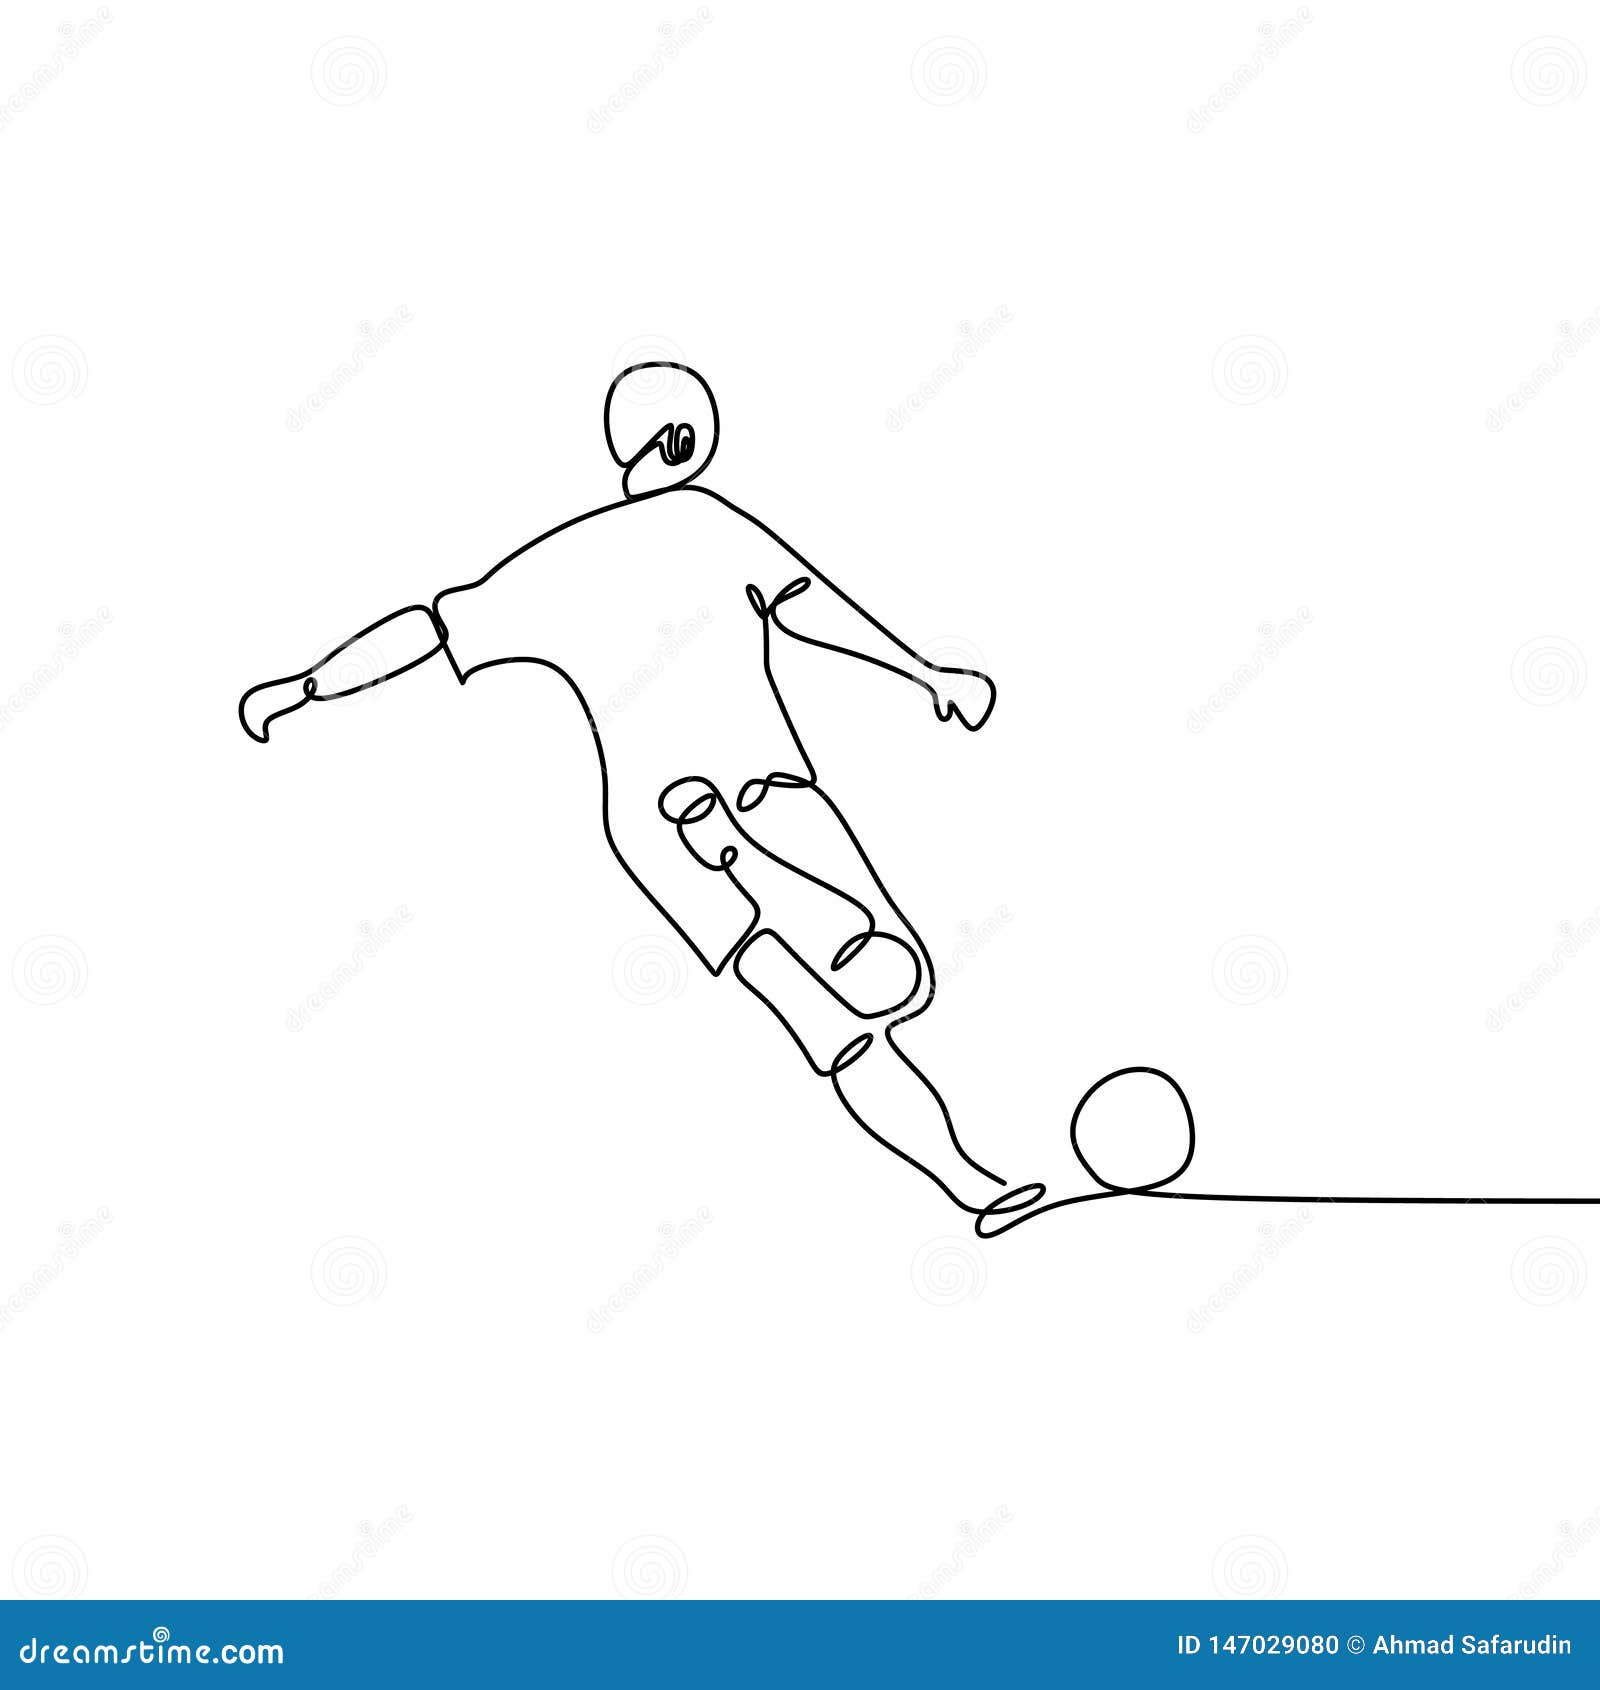 Continuous Line Drawing Of Football Player Kick Ball Stock Vector